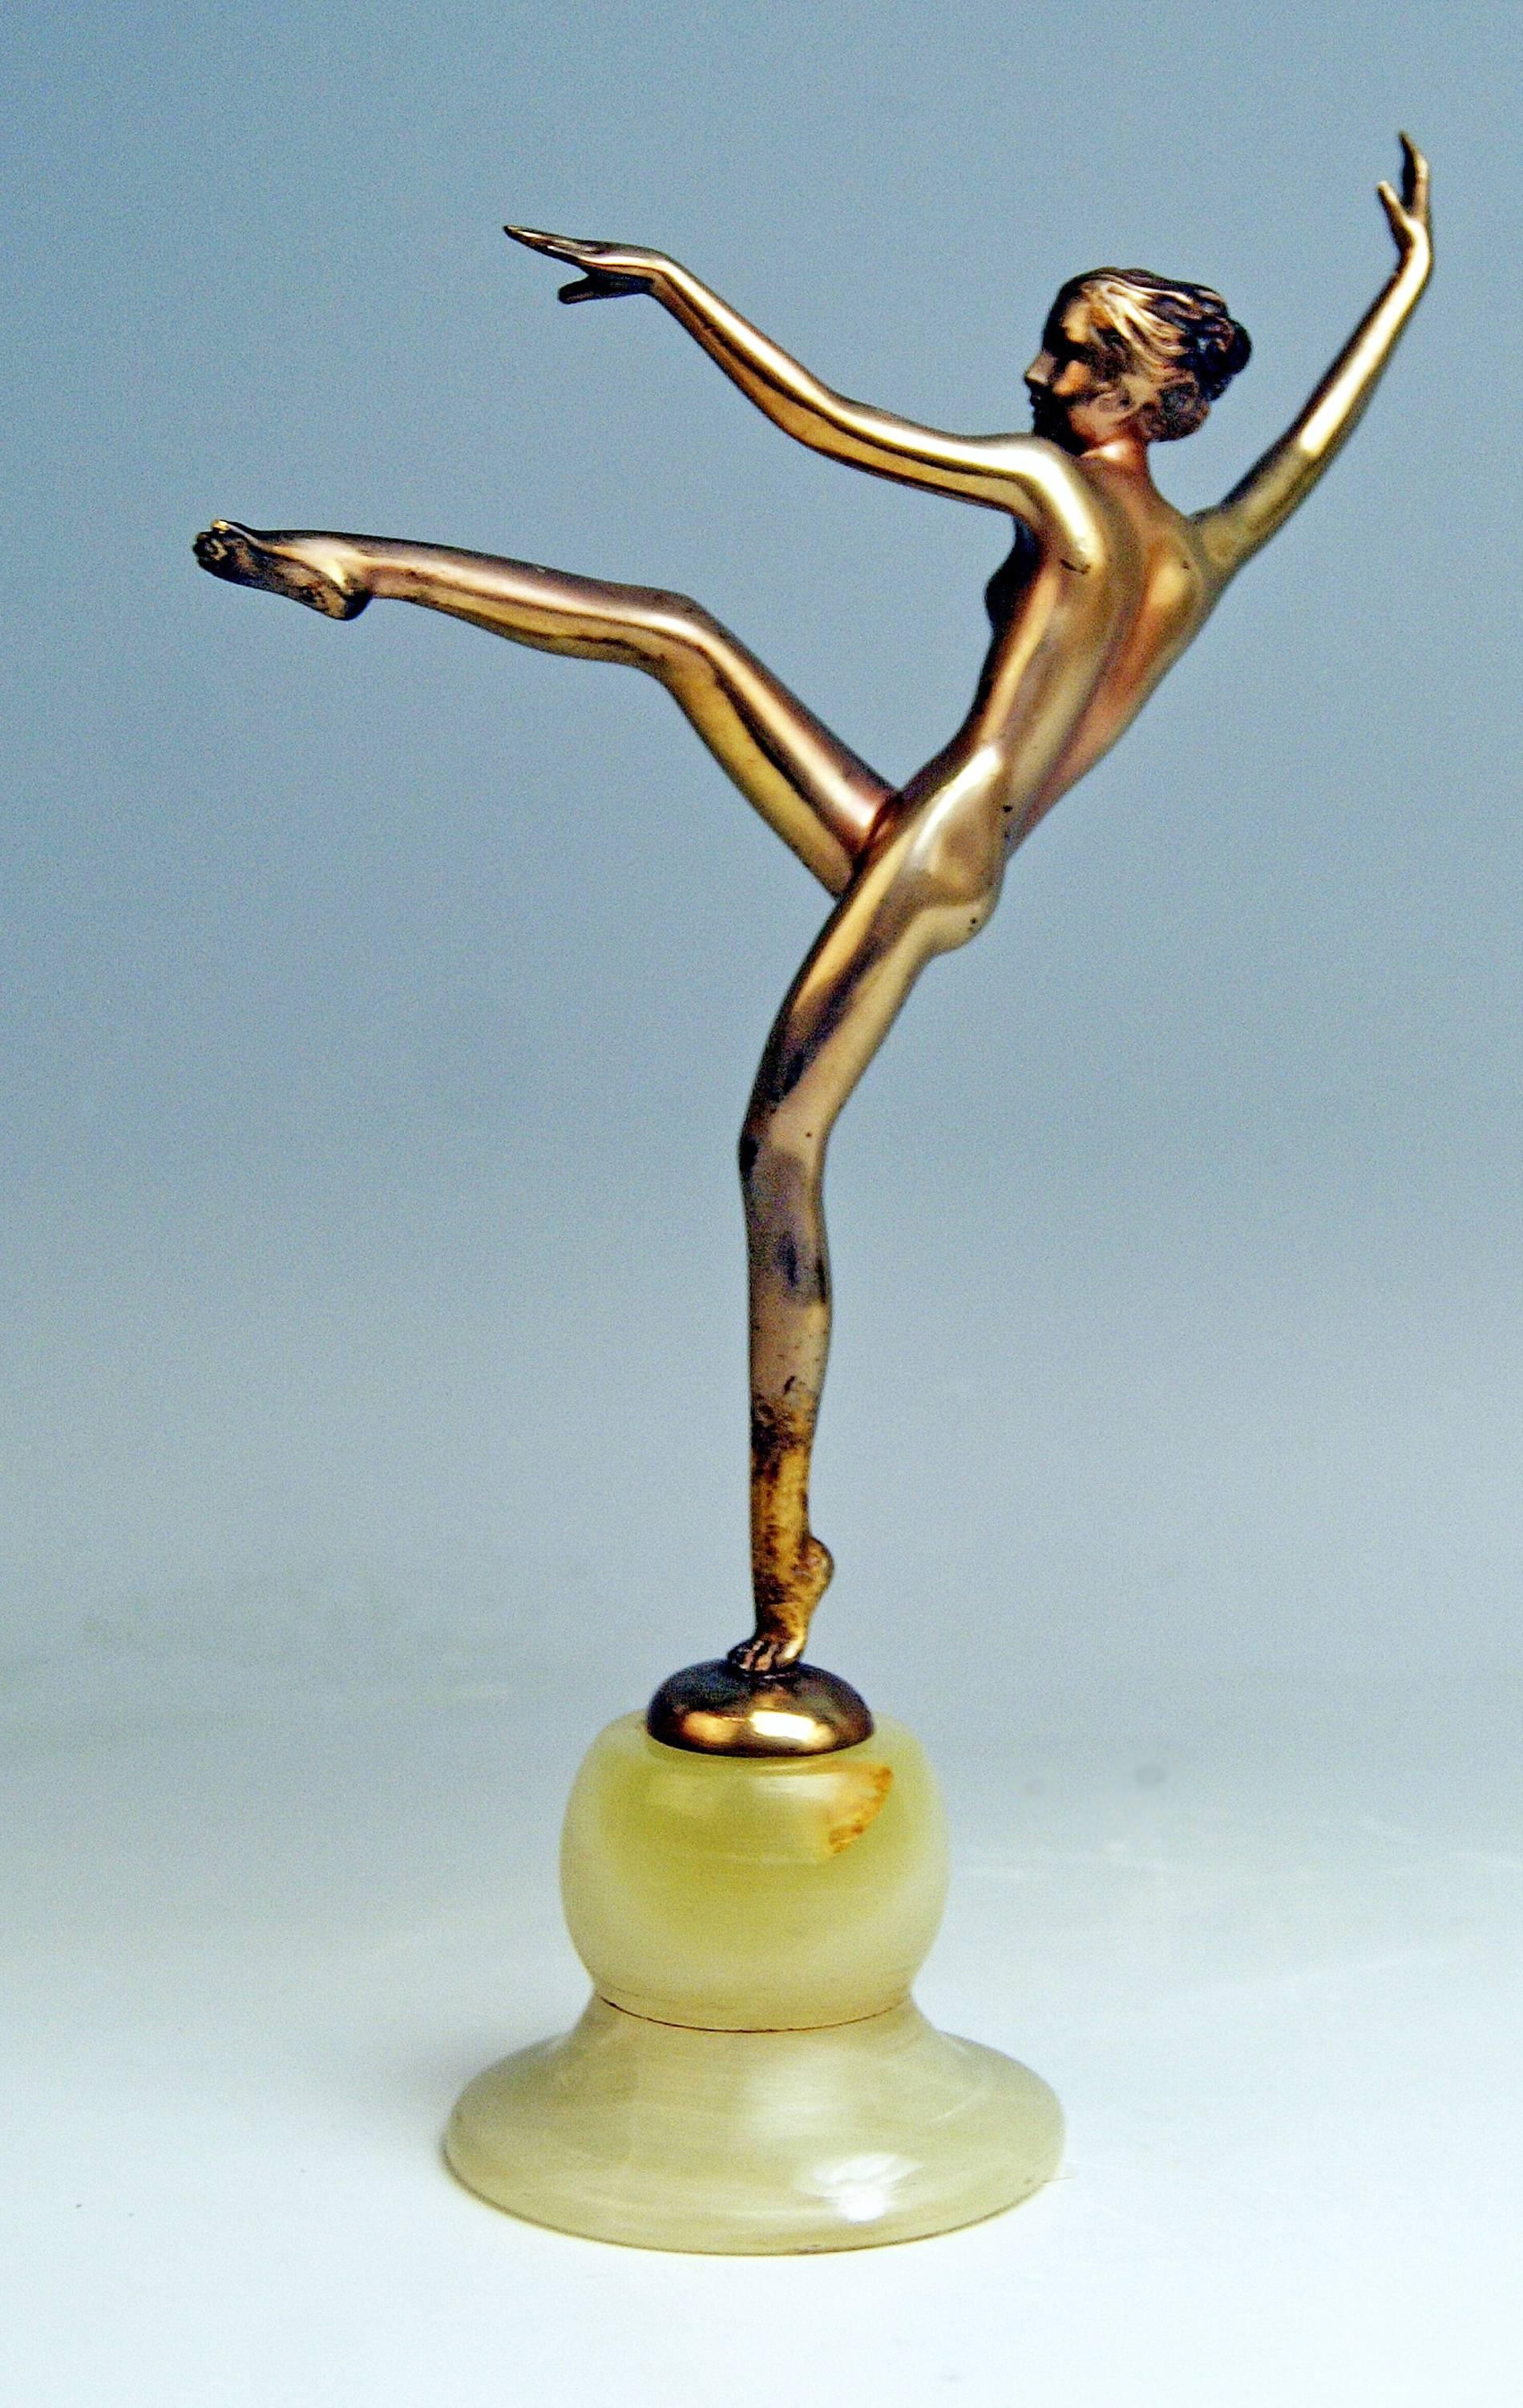 Vienna bronze finest Art Deco lady nude dancer

Technique:
bronze casting / mold
with golden patina

Designed by Josef Lorenzl (1892-1950) / one of most important designers having been active for Goldscheider manufactory as well as for Vienna